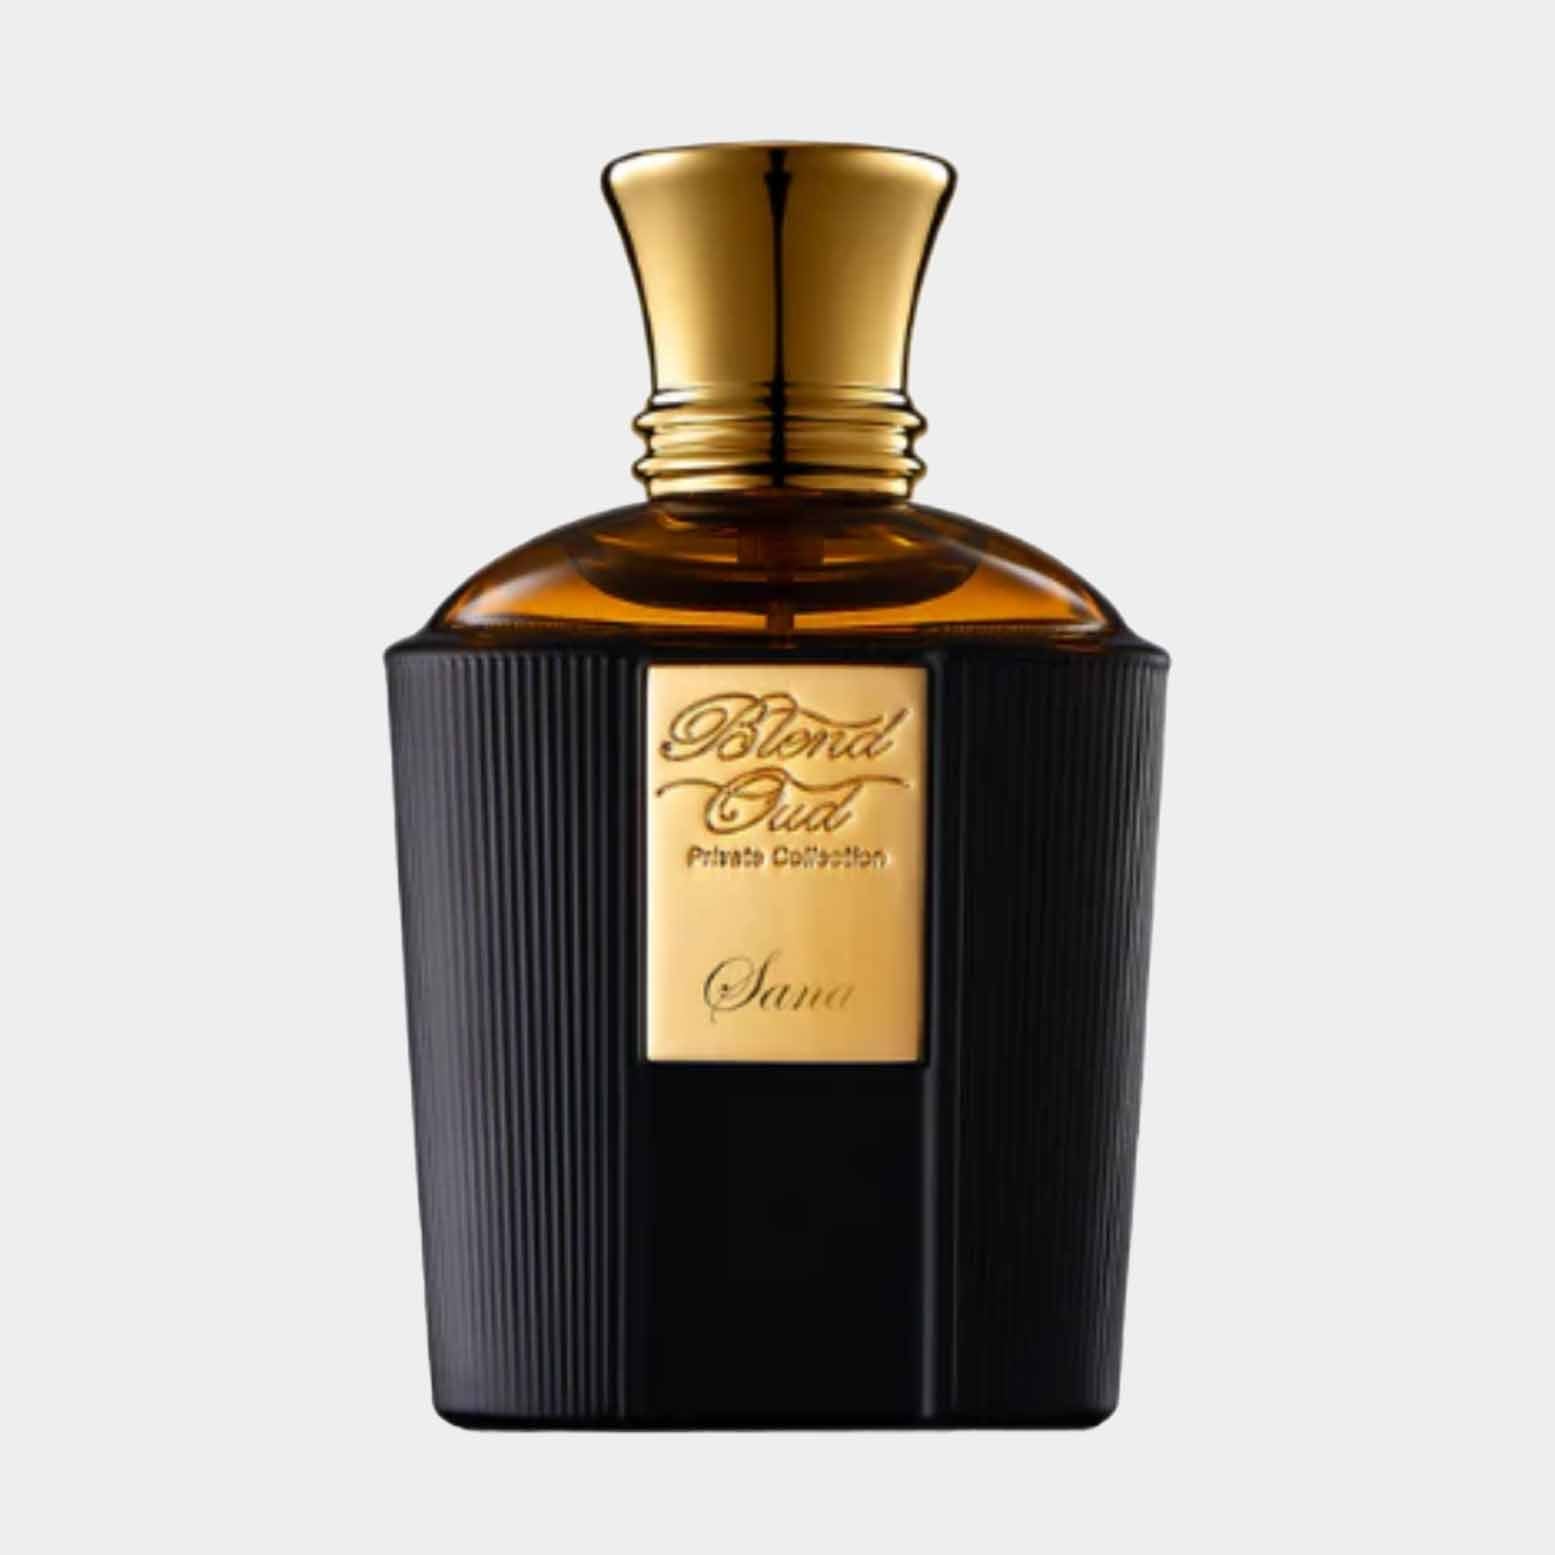 Blend Oud Private Collection Sana